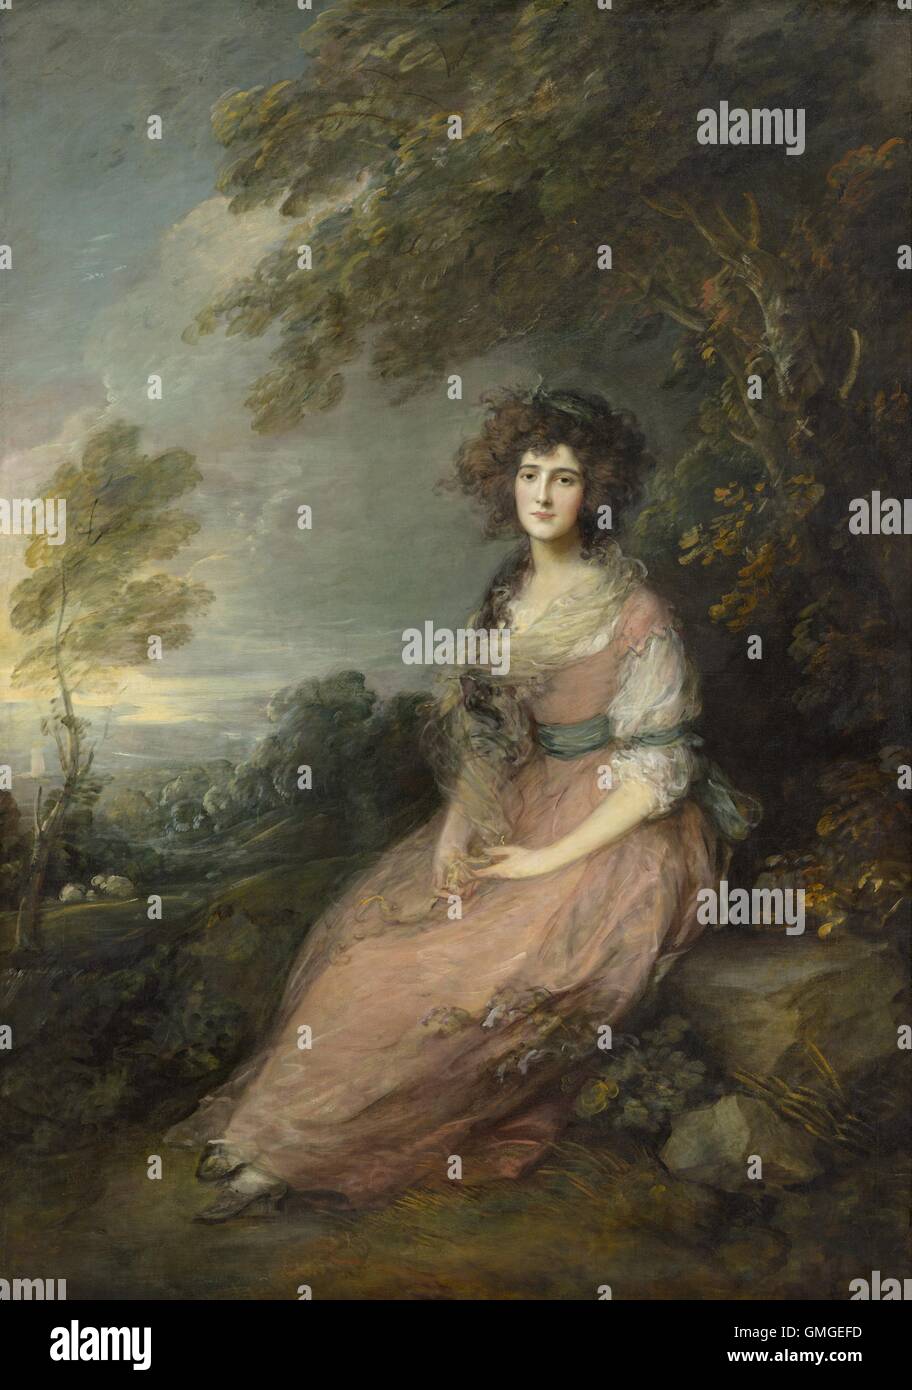 Mrs. Richard Brinsley Sheridan, by Thomas Gainsborough, 1785-87, British painting, oil on canvas. Elizabeth Linley was a noted soprano singer before her 1773 elopement with liberal politician and eminent playwright, Richard Brinsley Sheridan. Gainsborough (BSLOC 2016 6 144) Stock Photo